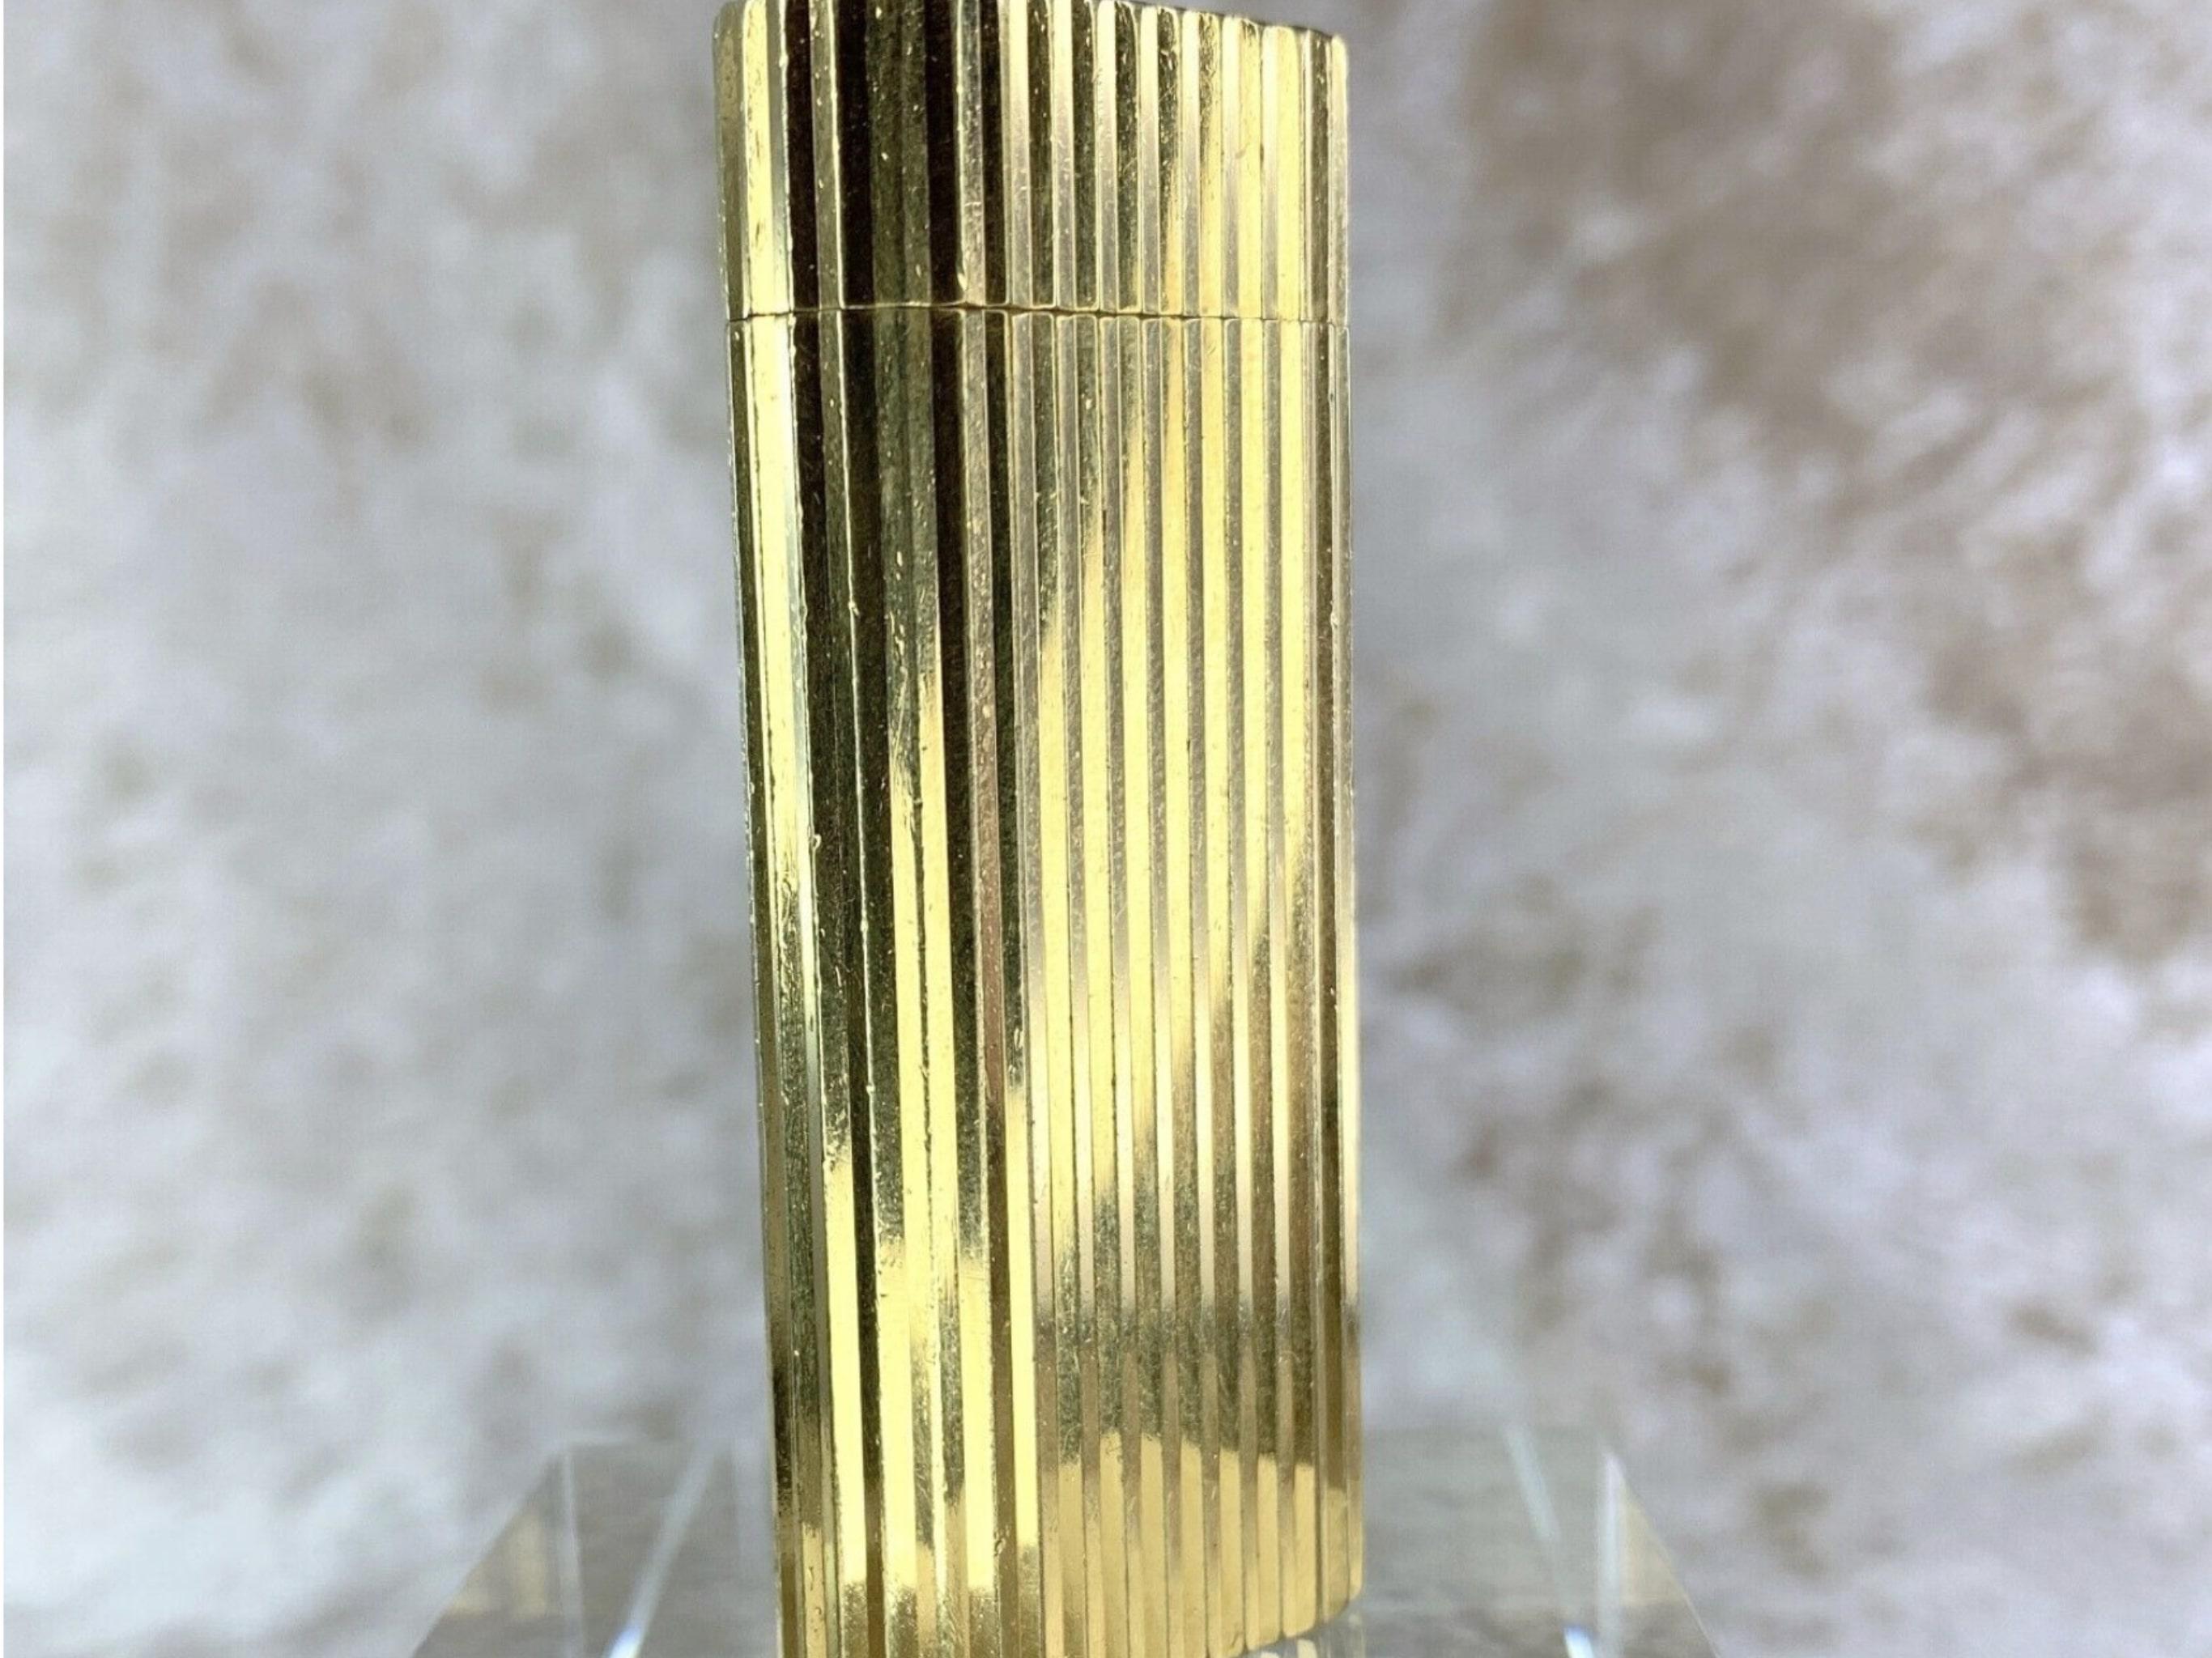 Cartier Vintage 
Gordon Cartier Lighter Short Oval 
18K Gold Plated with Diamonds
Original Cartier Case and Certificate
18K Gold Plated Finish and Embellished with Diamonds
Circa 2000
Was overhauled in 2022 at Cartier. 
In fantastic condition 